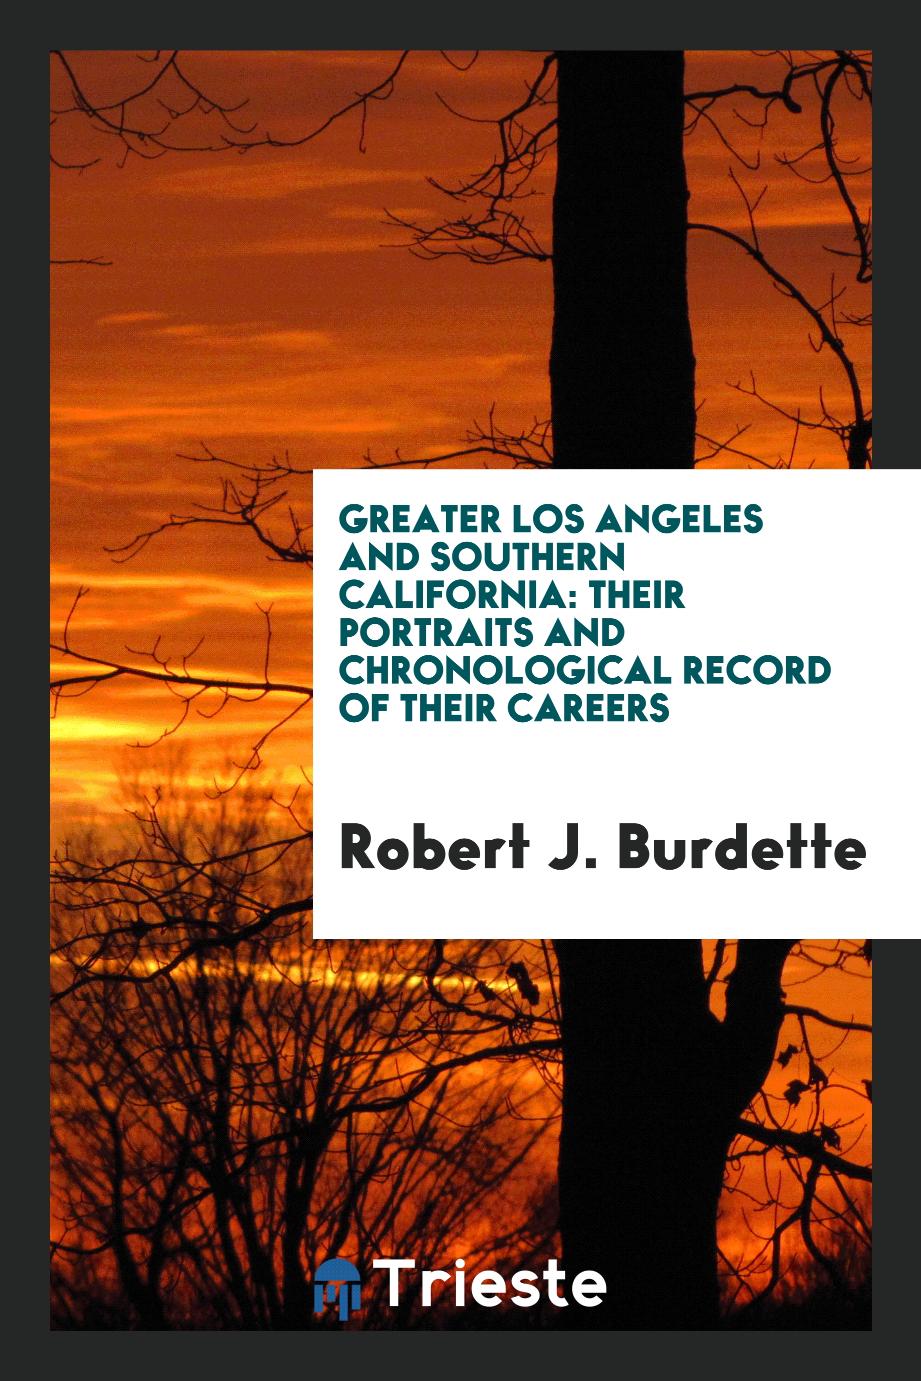 Greater Los Angeles and Southern California: their portraits and chronological record of their careers